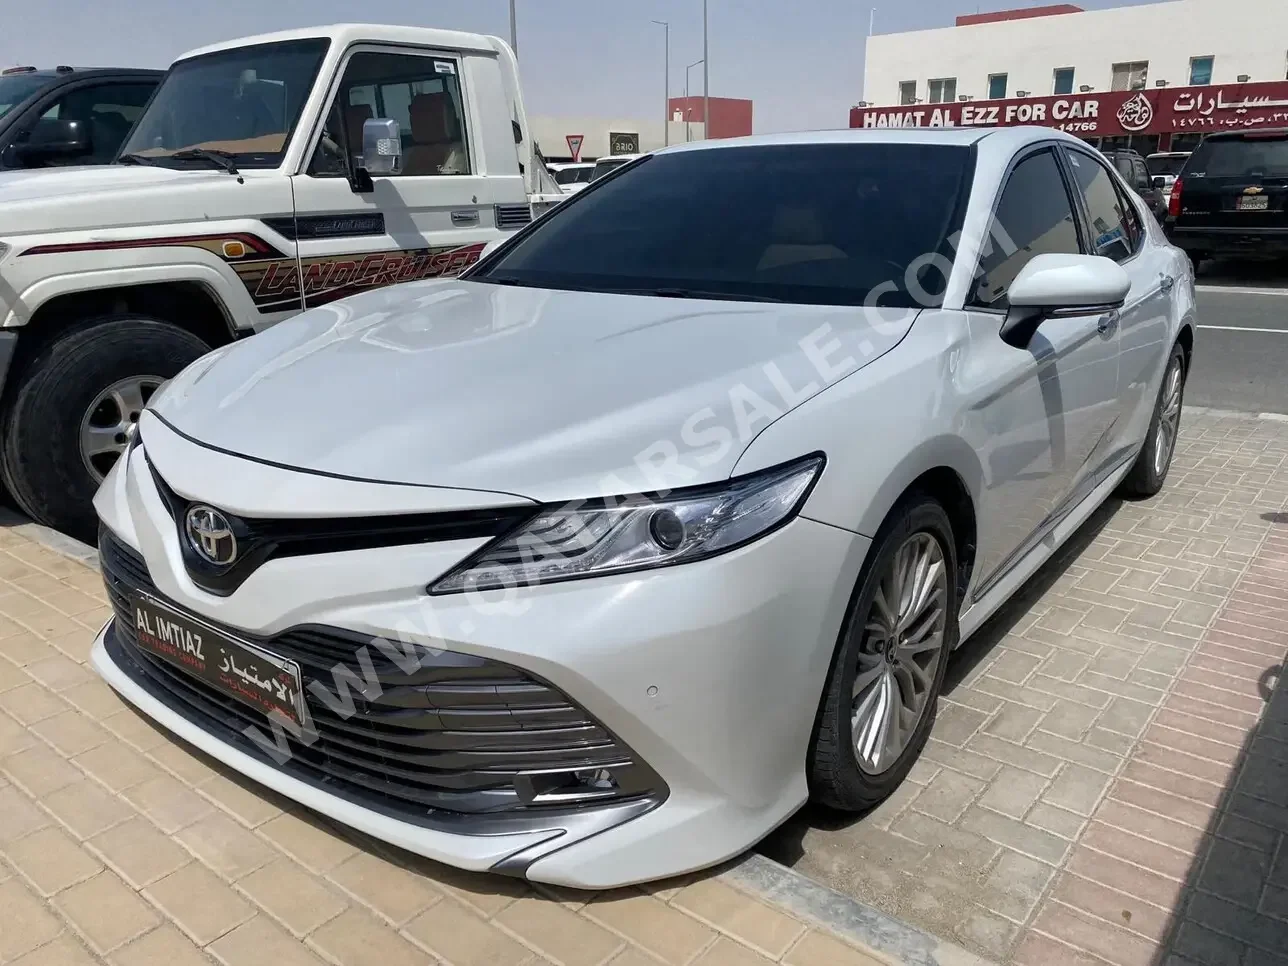 Toyota  Camry  Limited  2019  Automatic  15,000 Km  6 Cylinder  Front Wheel Drive (FWD)  Sedan  White